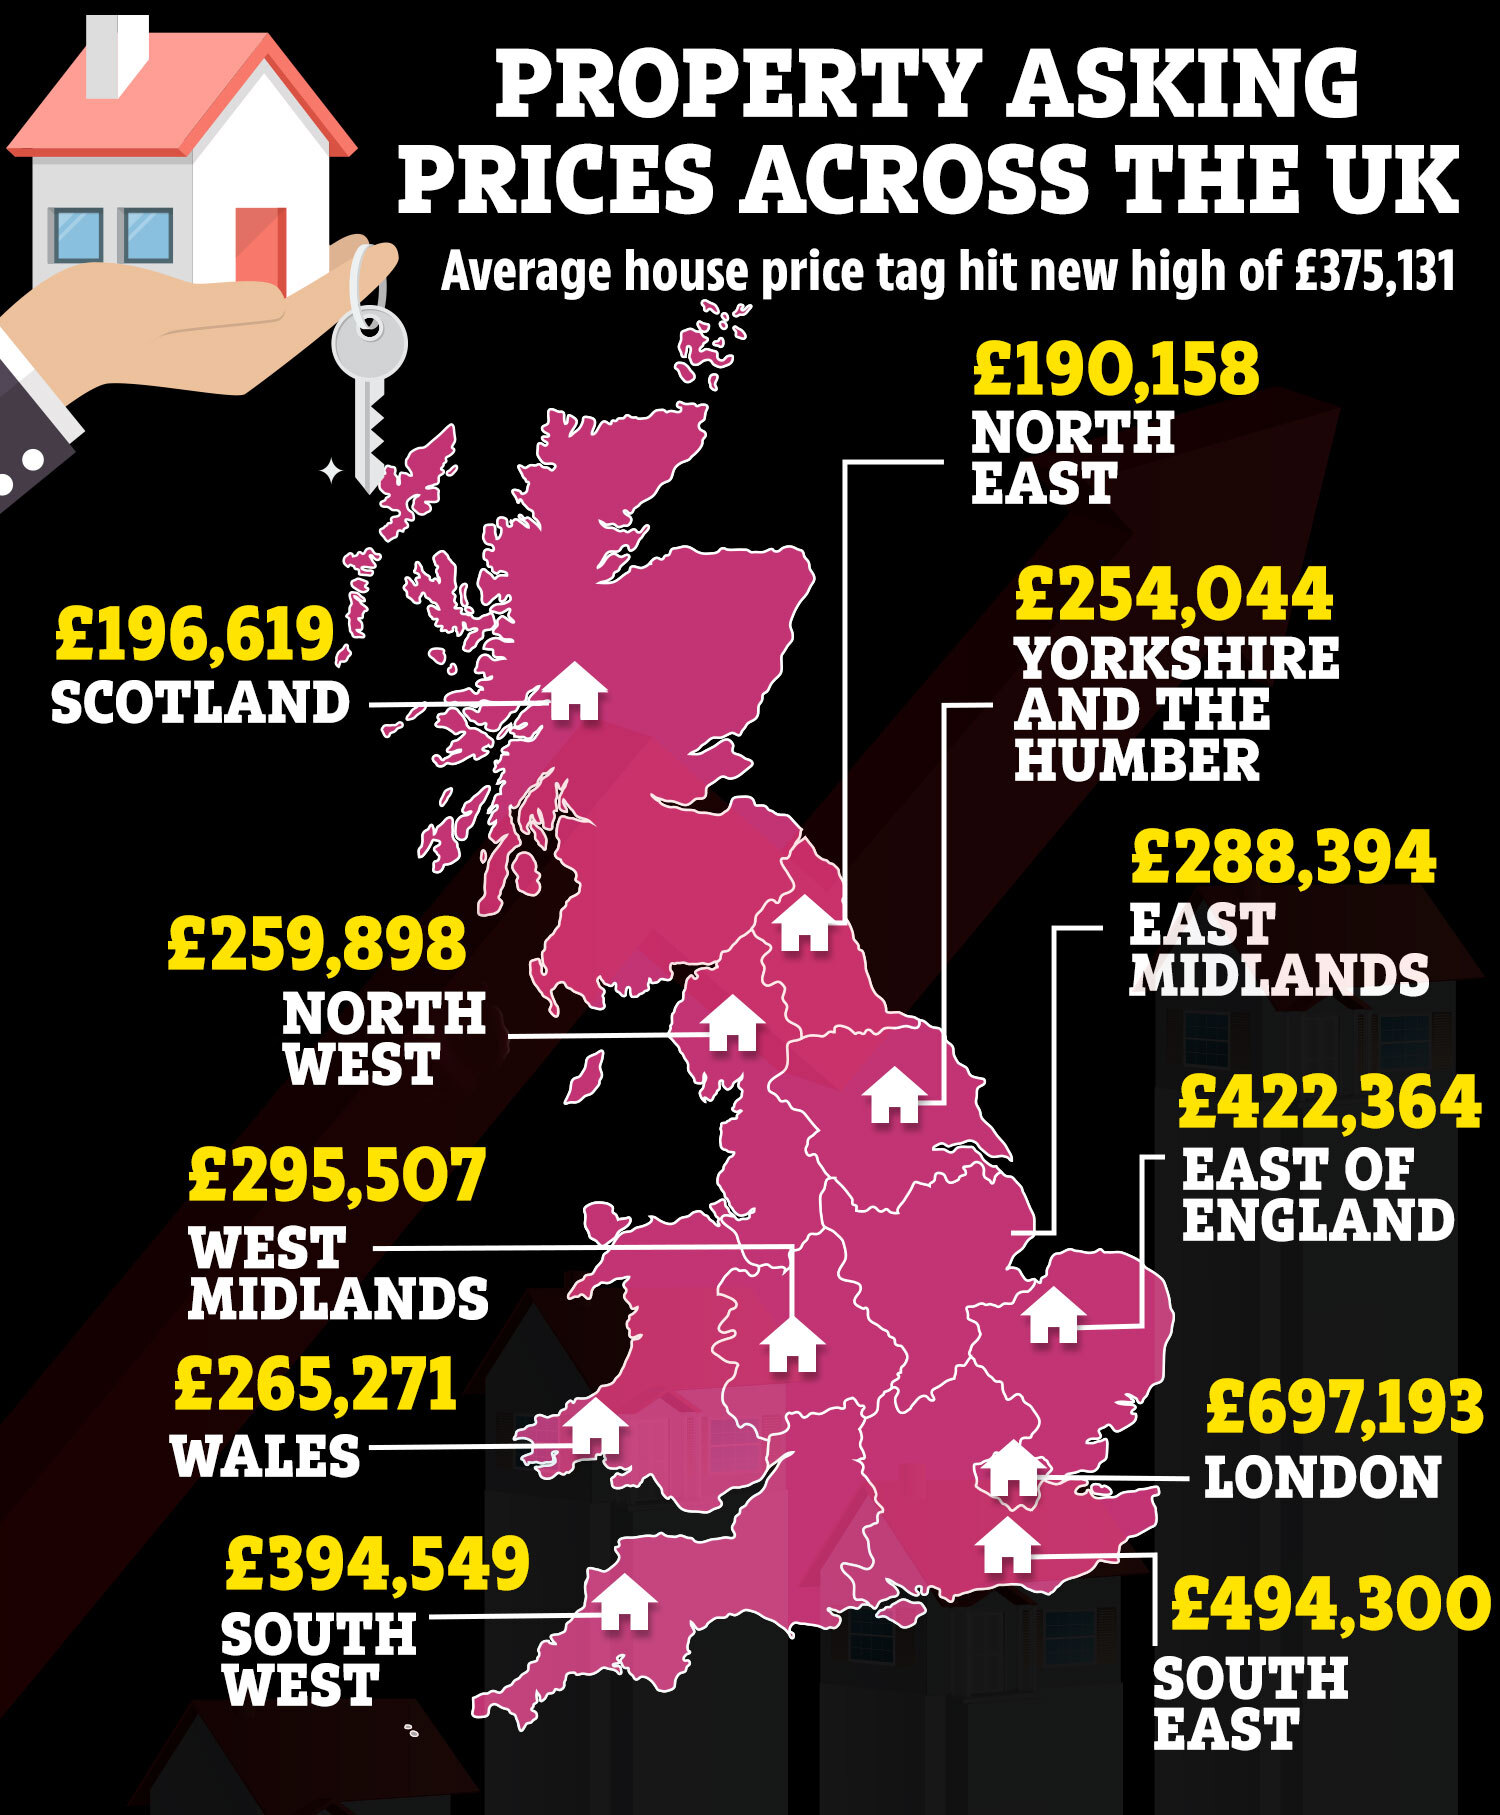 The average price tag on a home reached £375,131 in May. Data: Rightmove